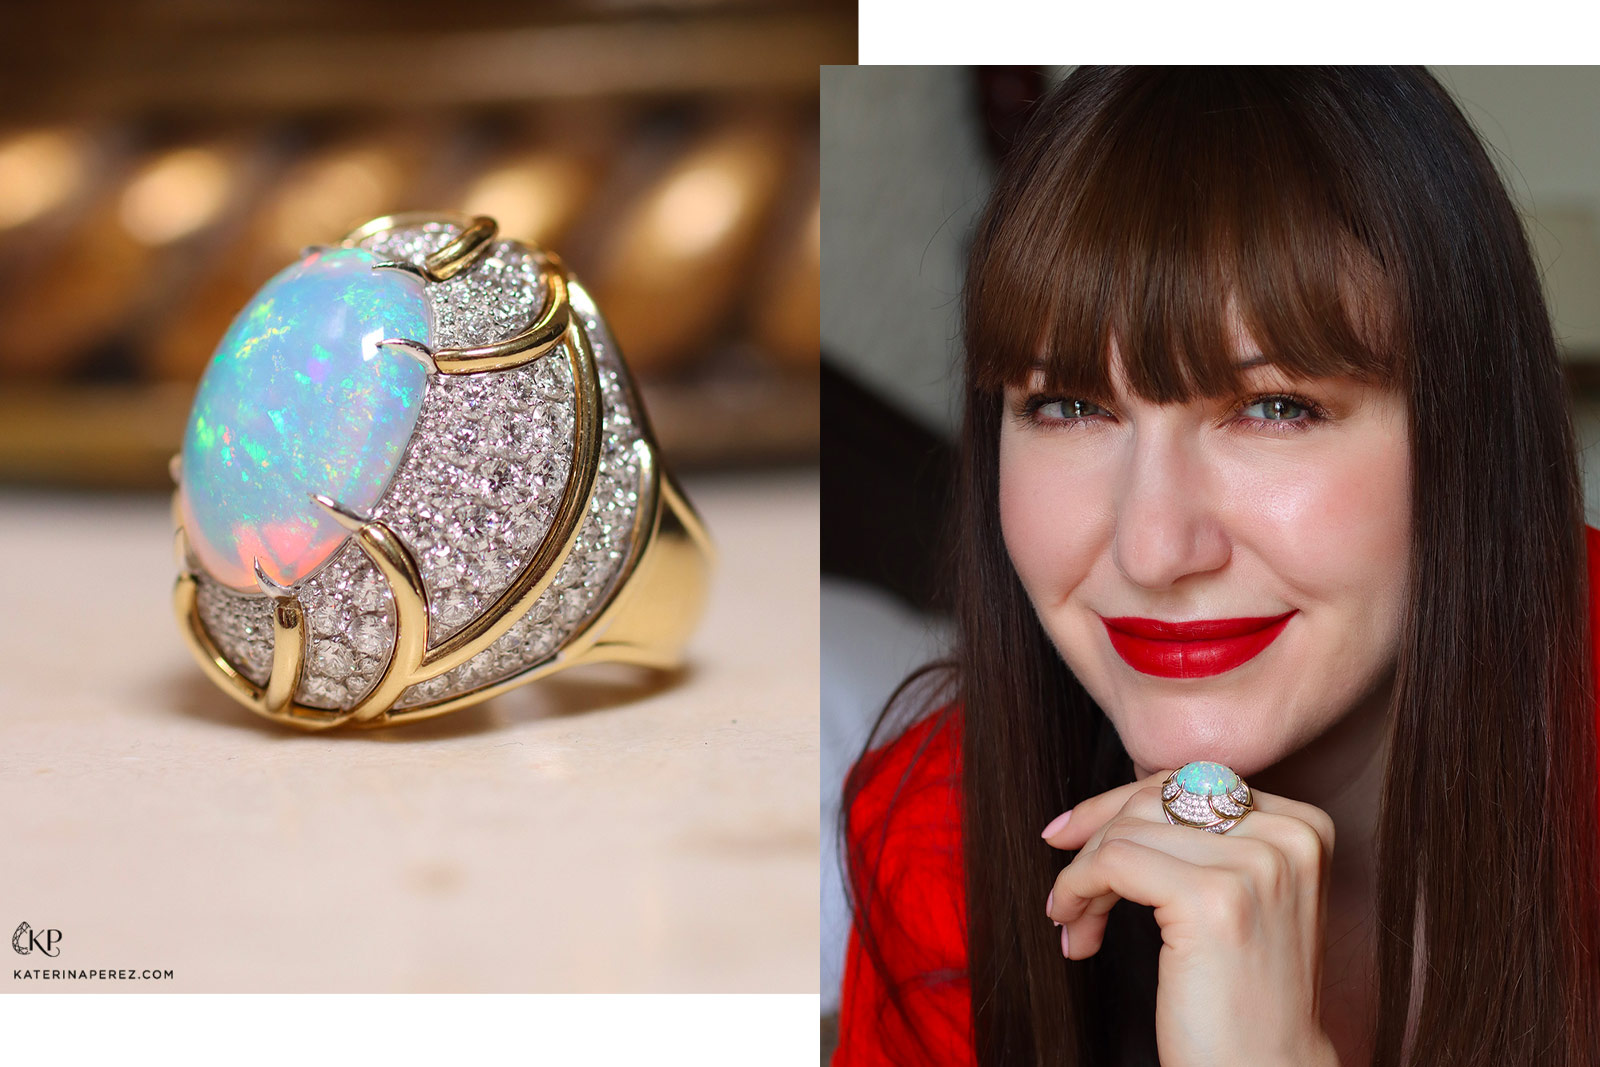 Katerina Perez wears a Veschetti cocktail ring with an opal cabochon and colourless diamonds in 18k yellow gold